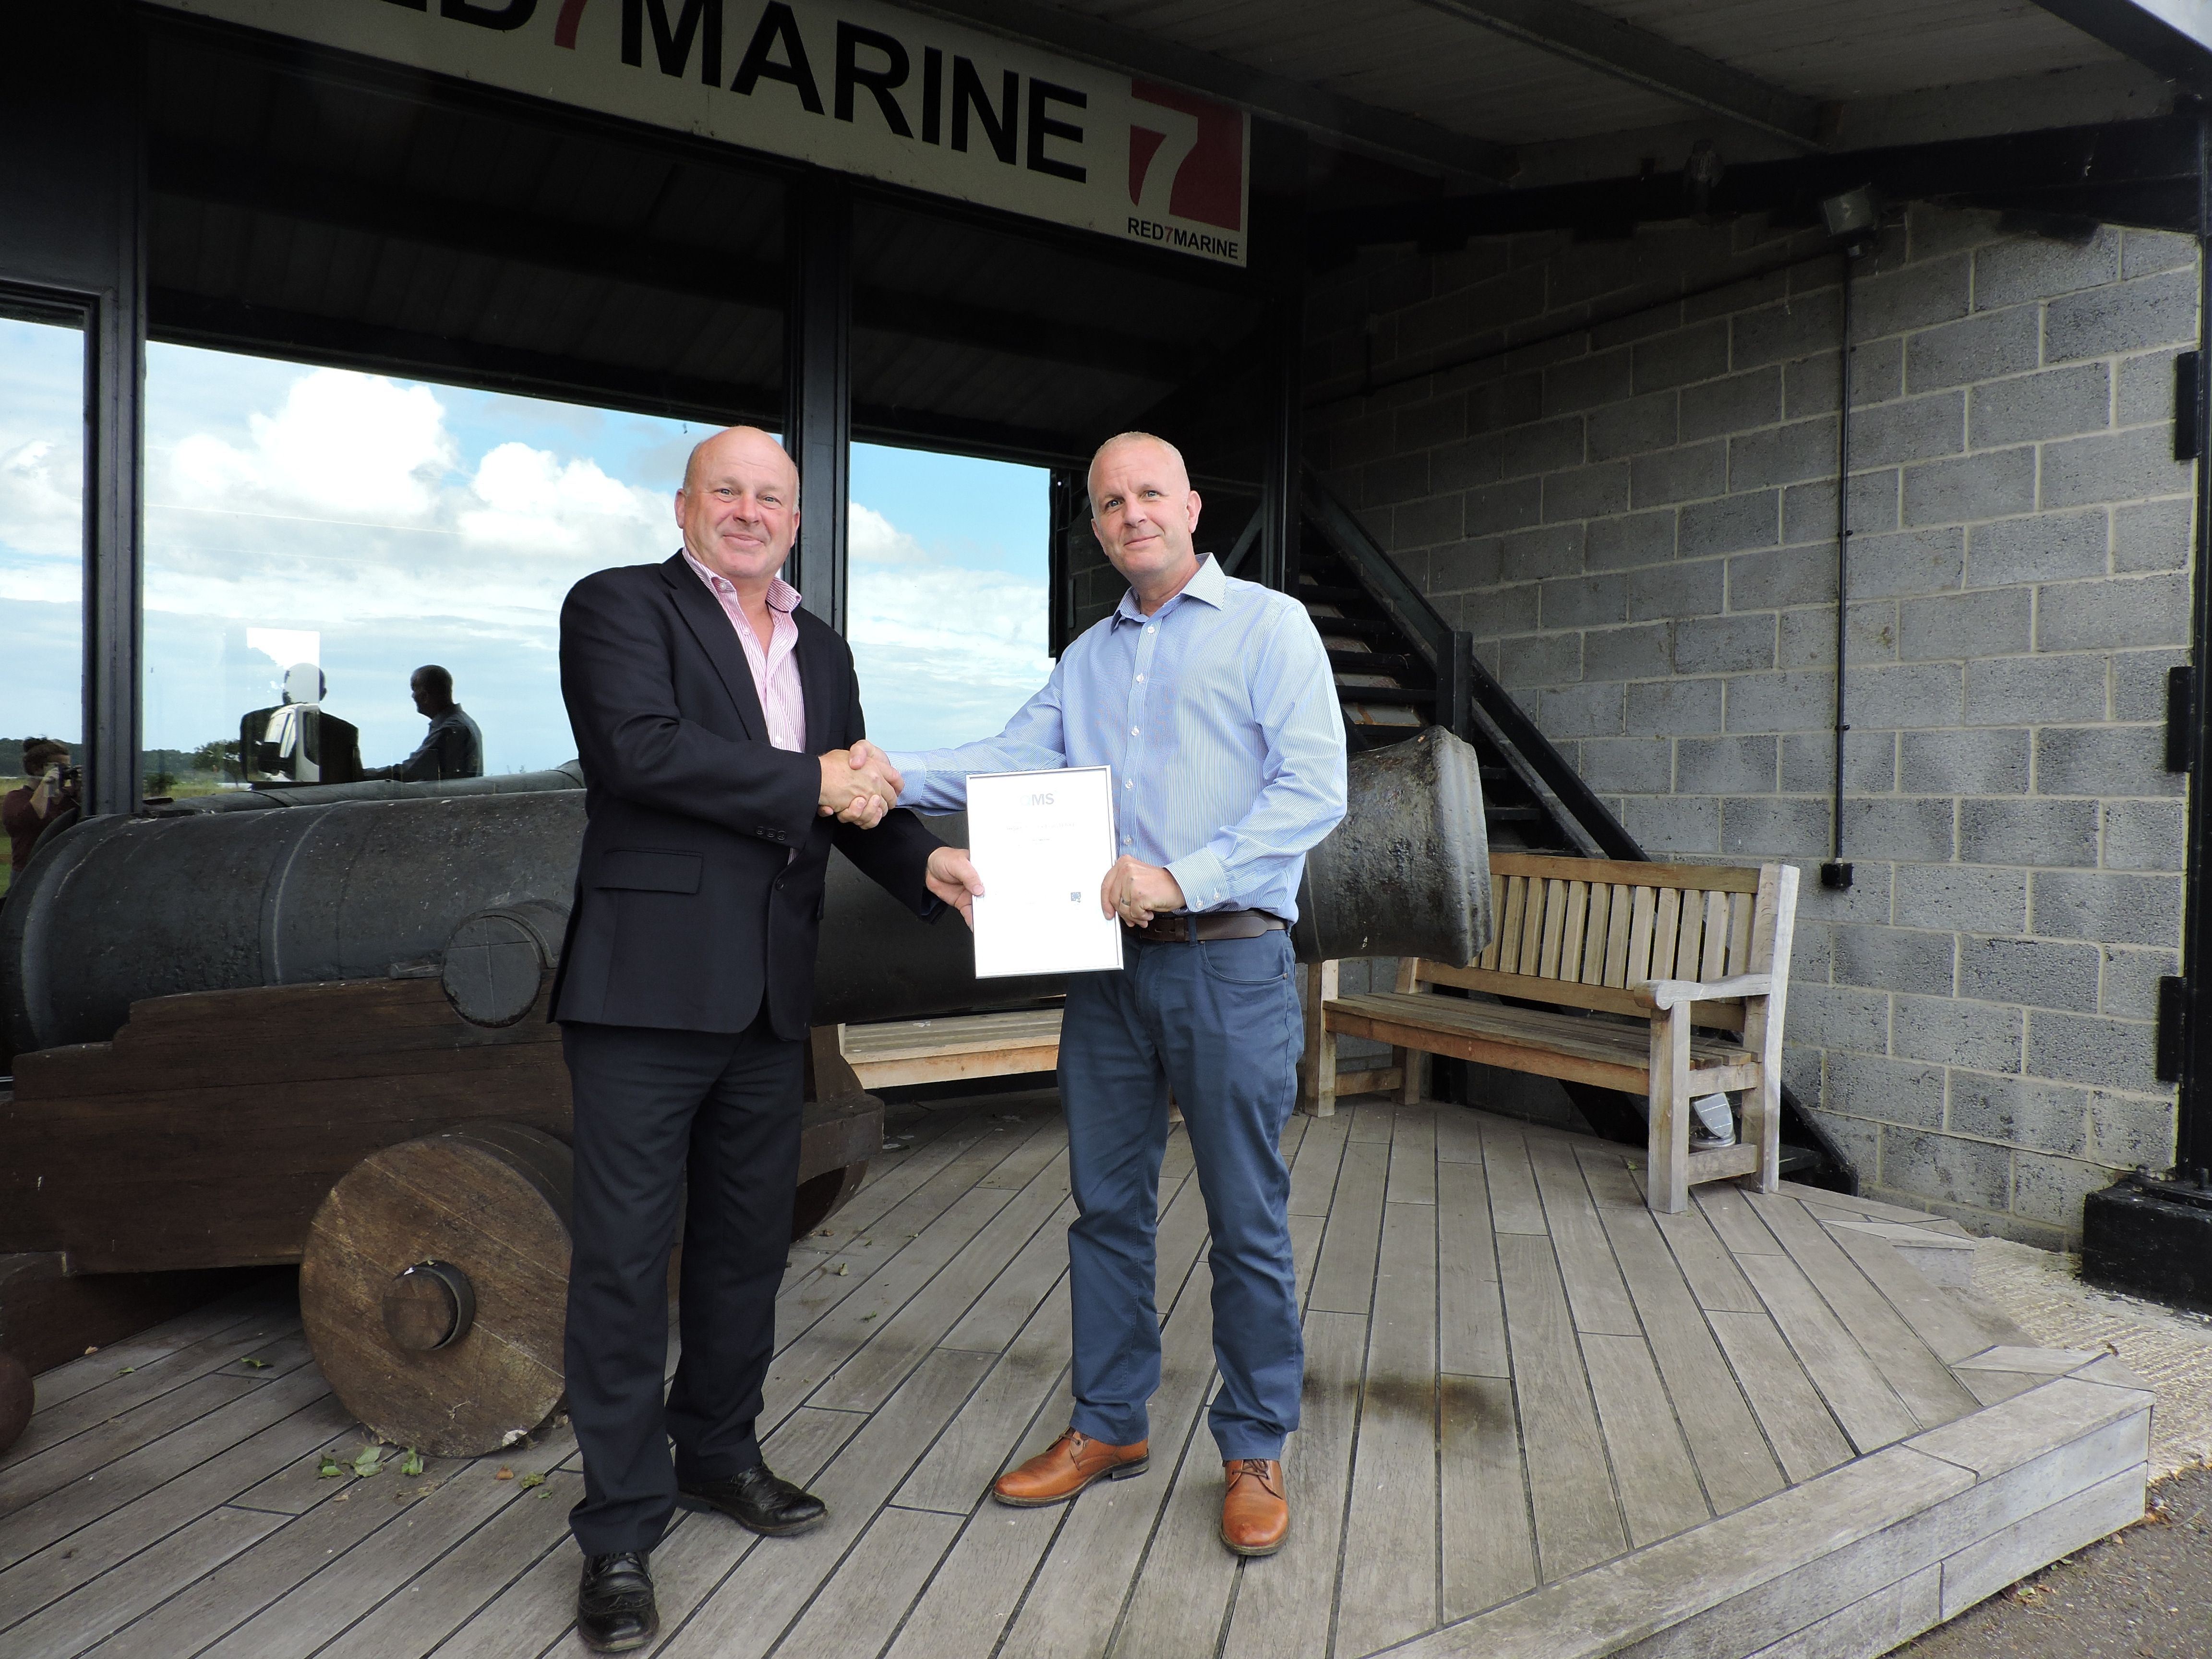 Mark Smith (QMS Manager) presenting Nick Offord (Managing Director) with the OHSAS 18001: 2007 accreditation certificate.